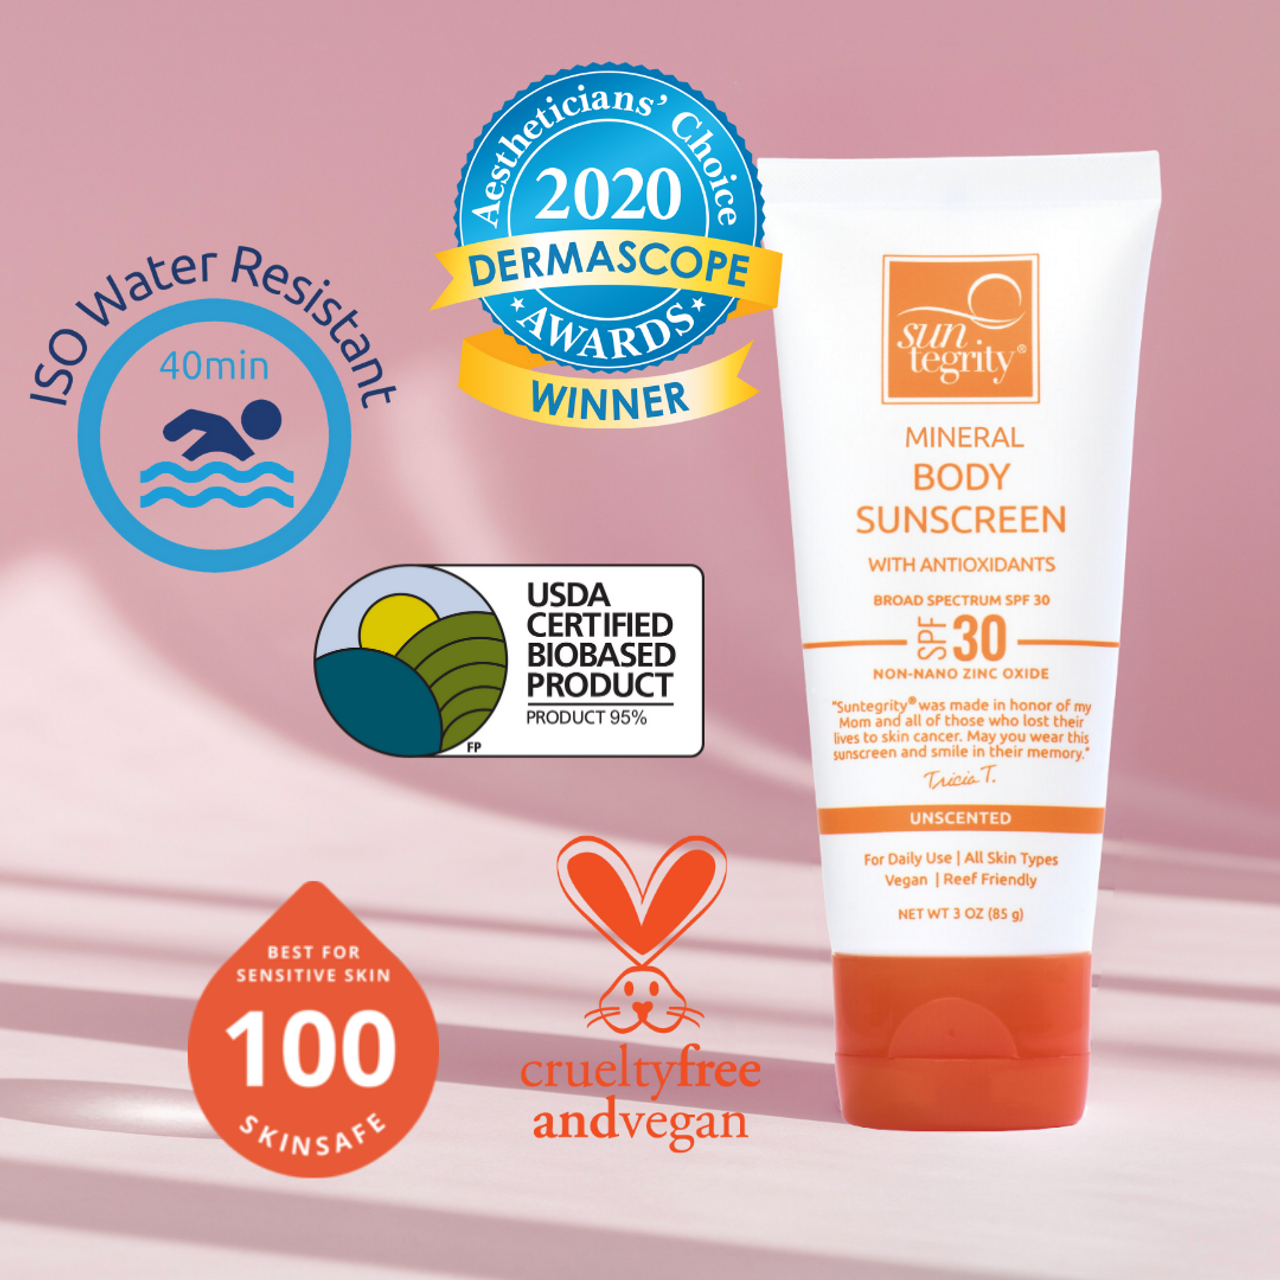 Suntegrity Mineral Body Sunscreen Unscented - Broad Spectrum SPF 30